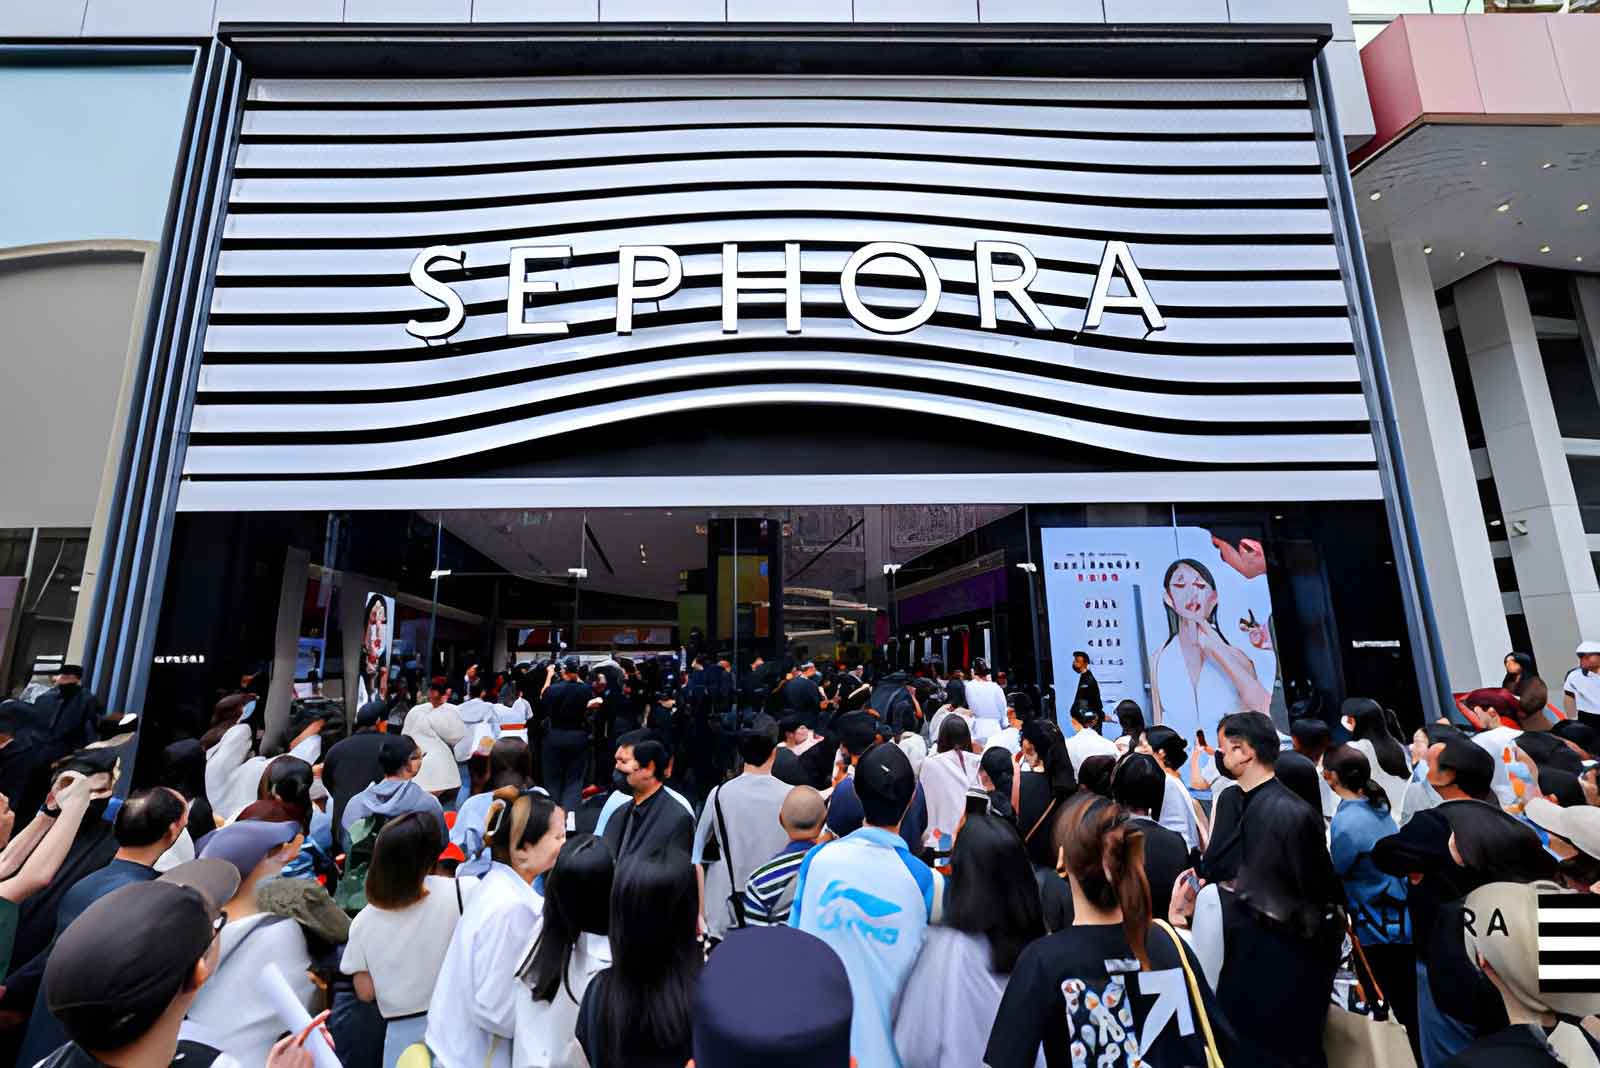 Crowd in front of Sephora store